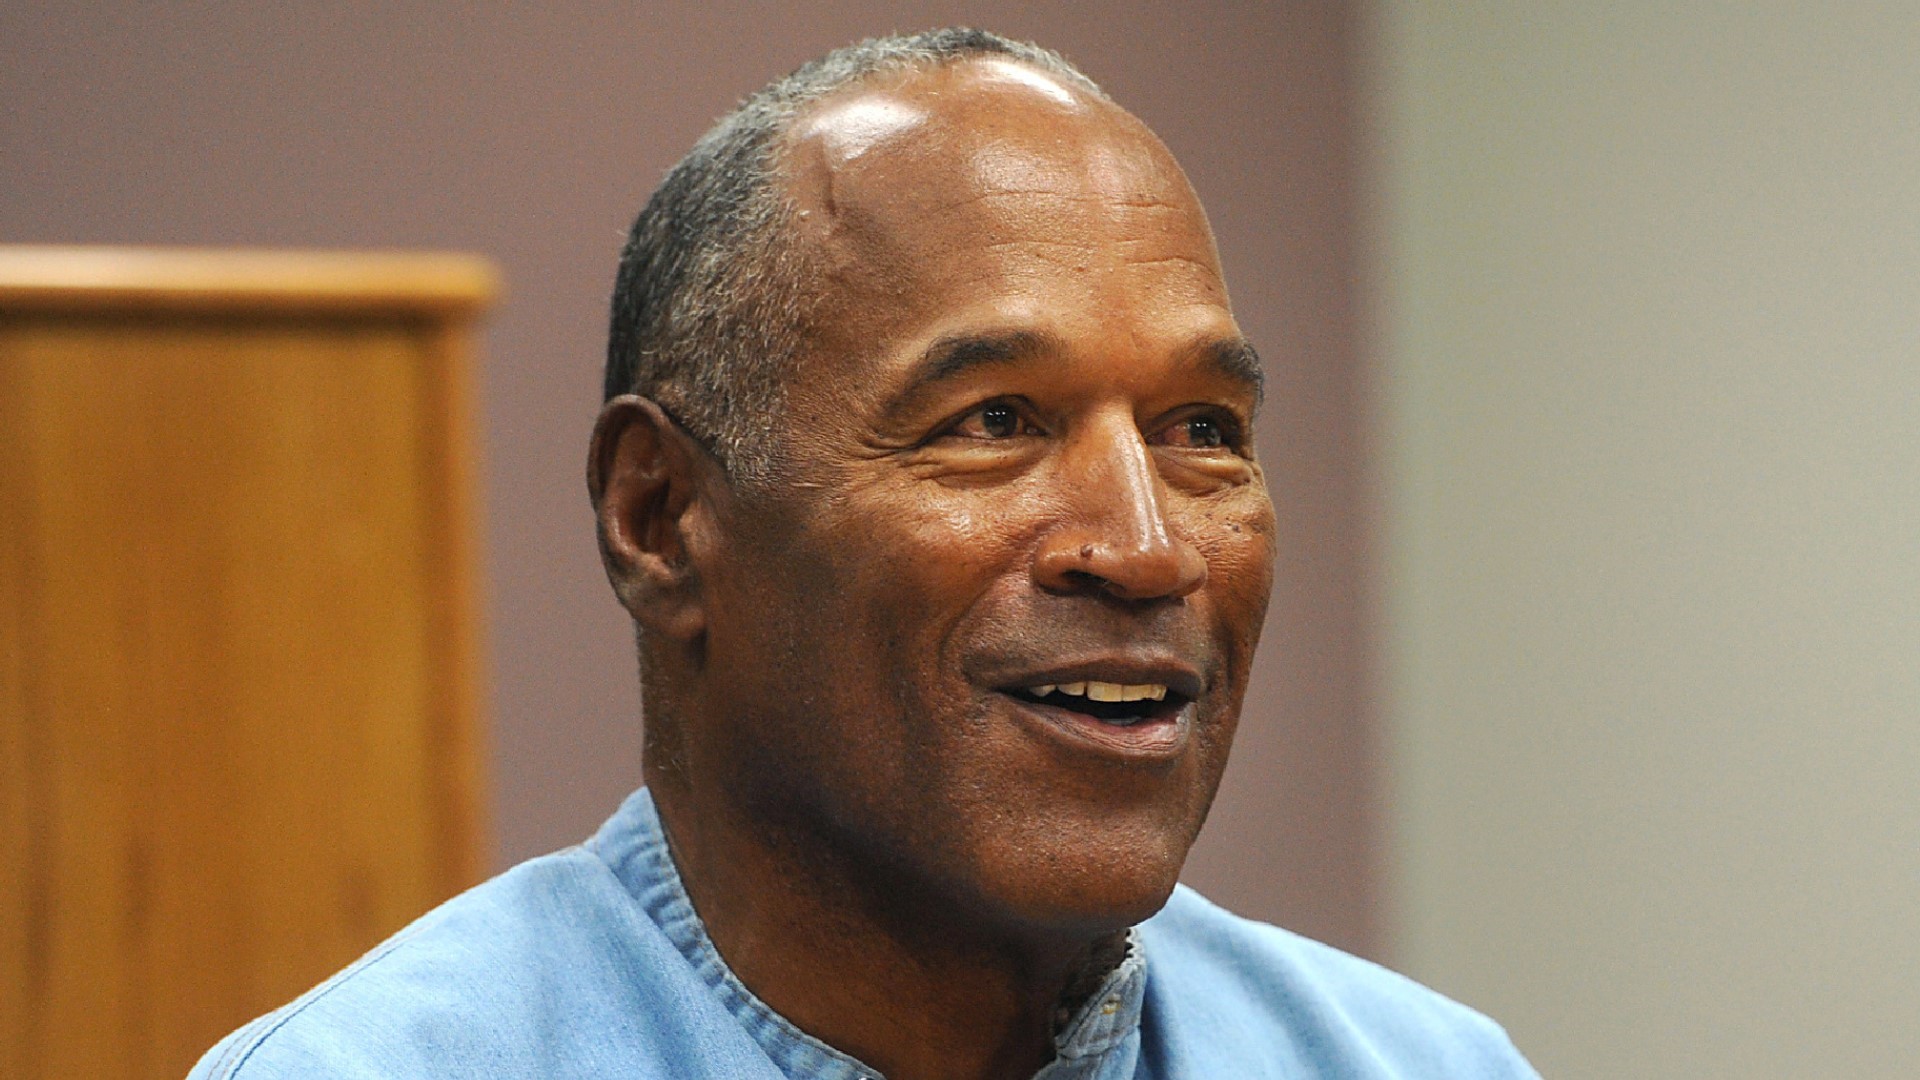 The family of O.J. Simpson announced his death on social media. He was 76.